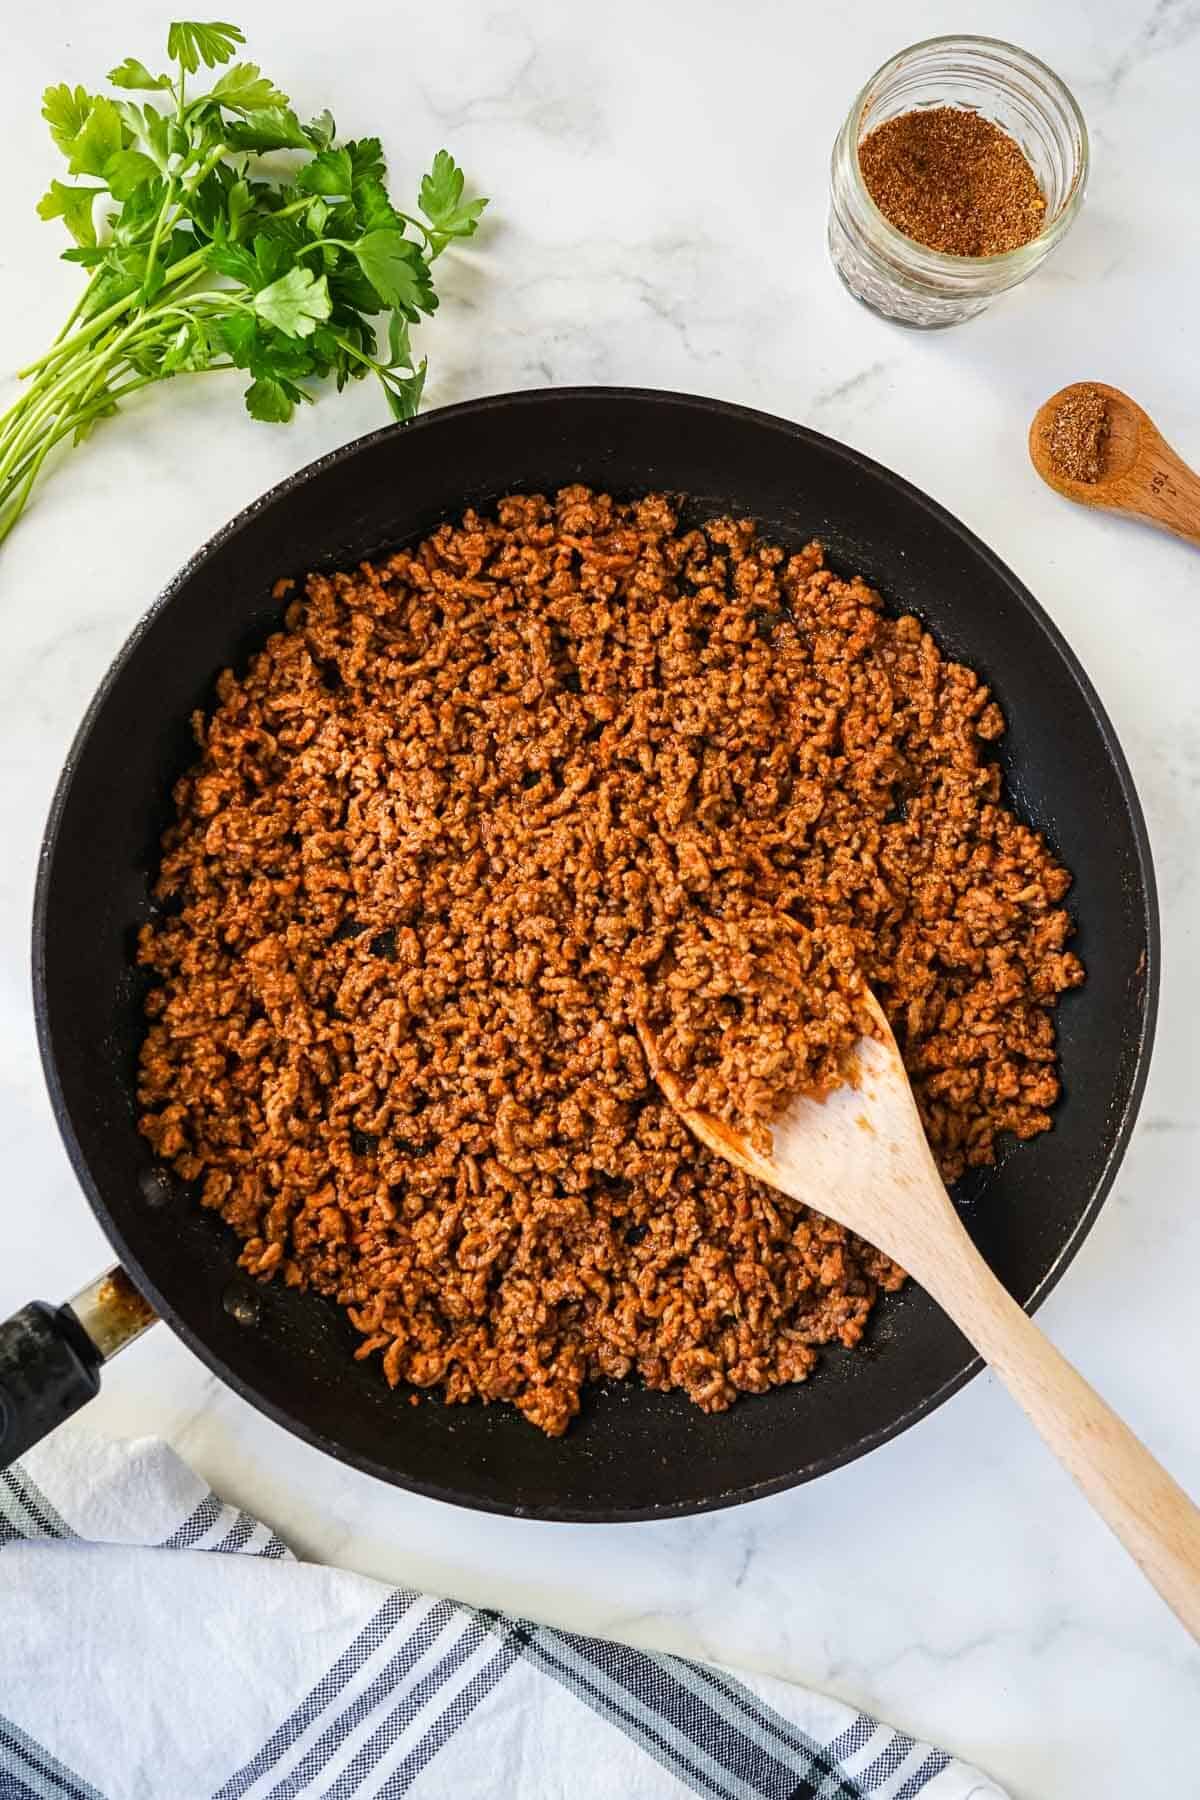 Homemade taco meat cooked in a skillet with a wooden spoon.